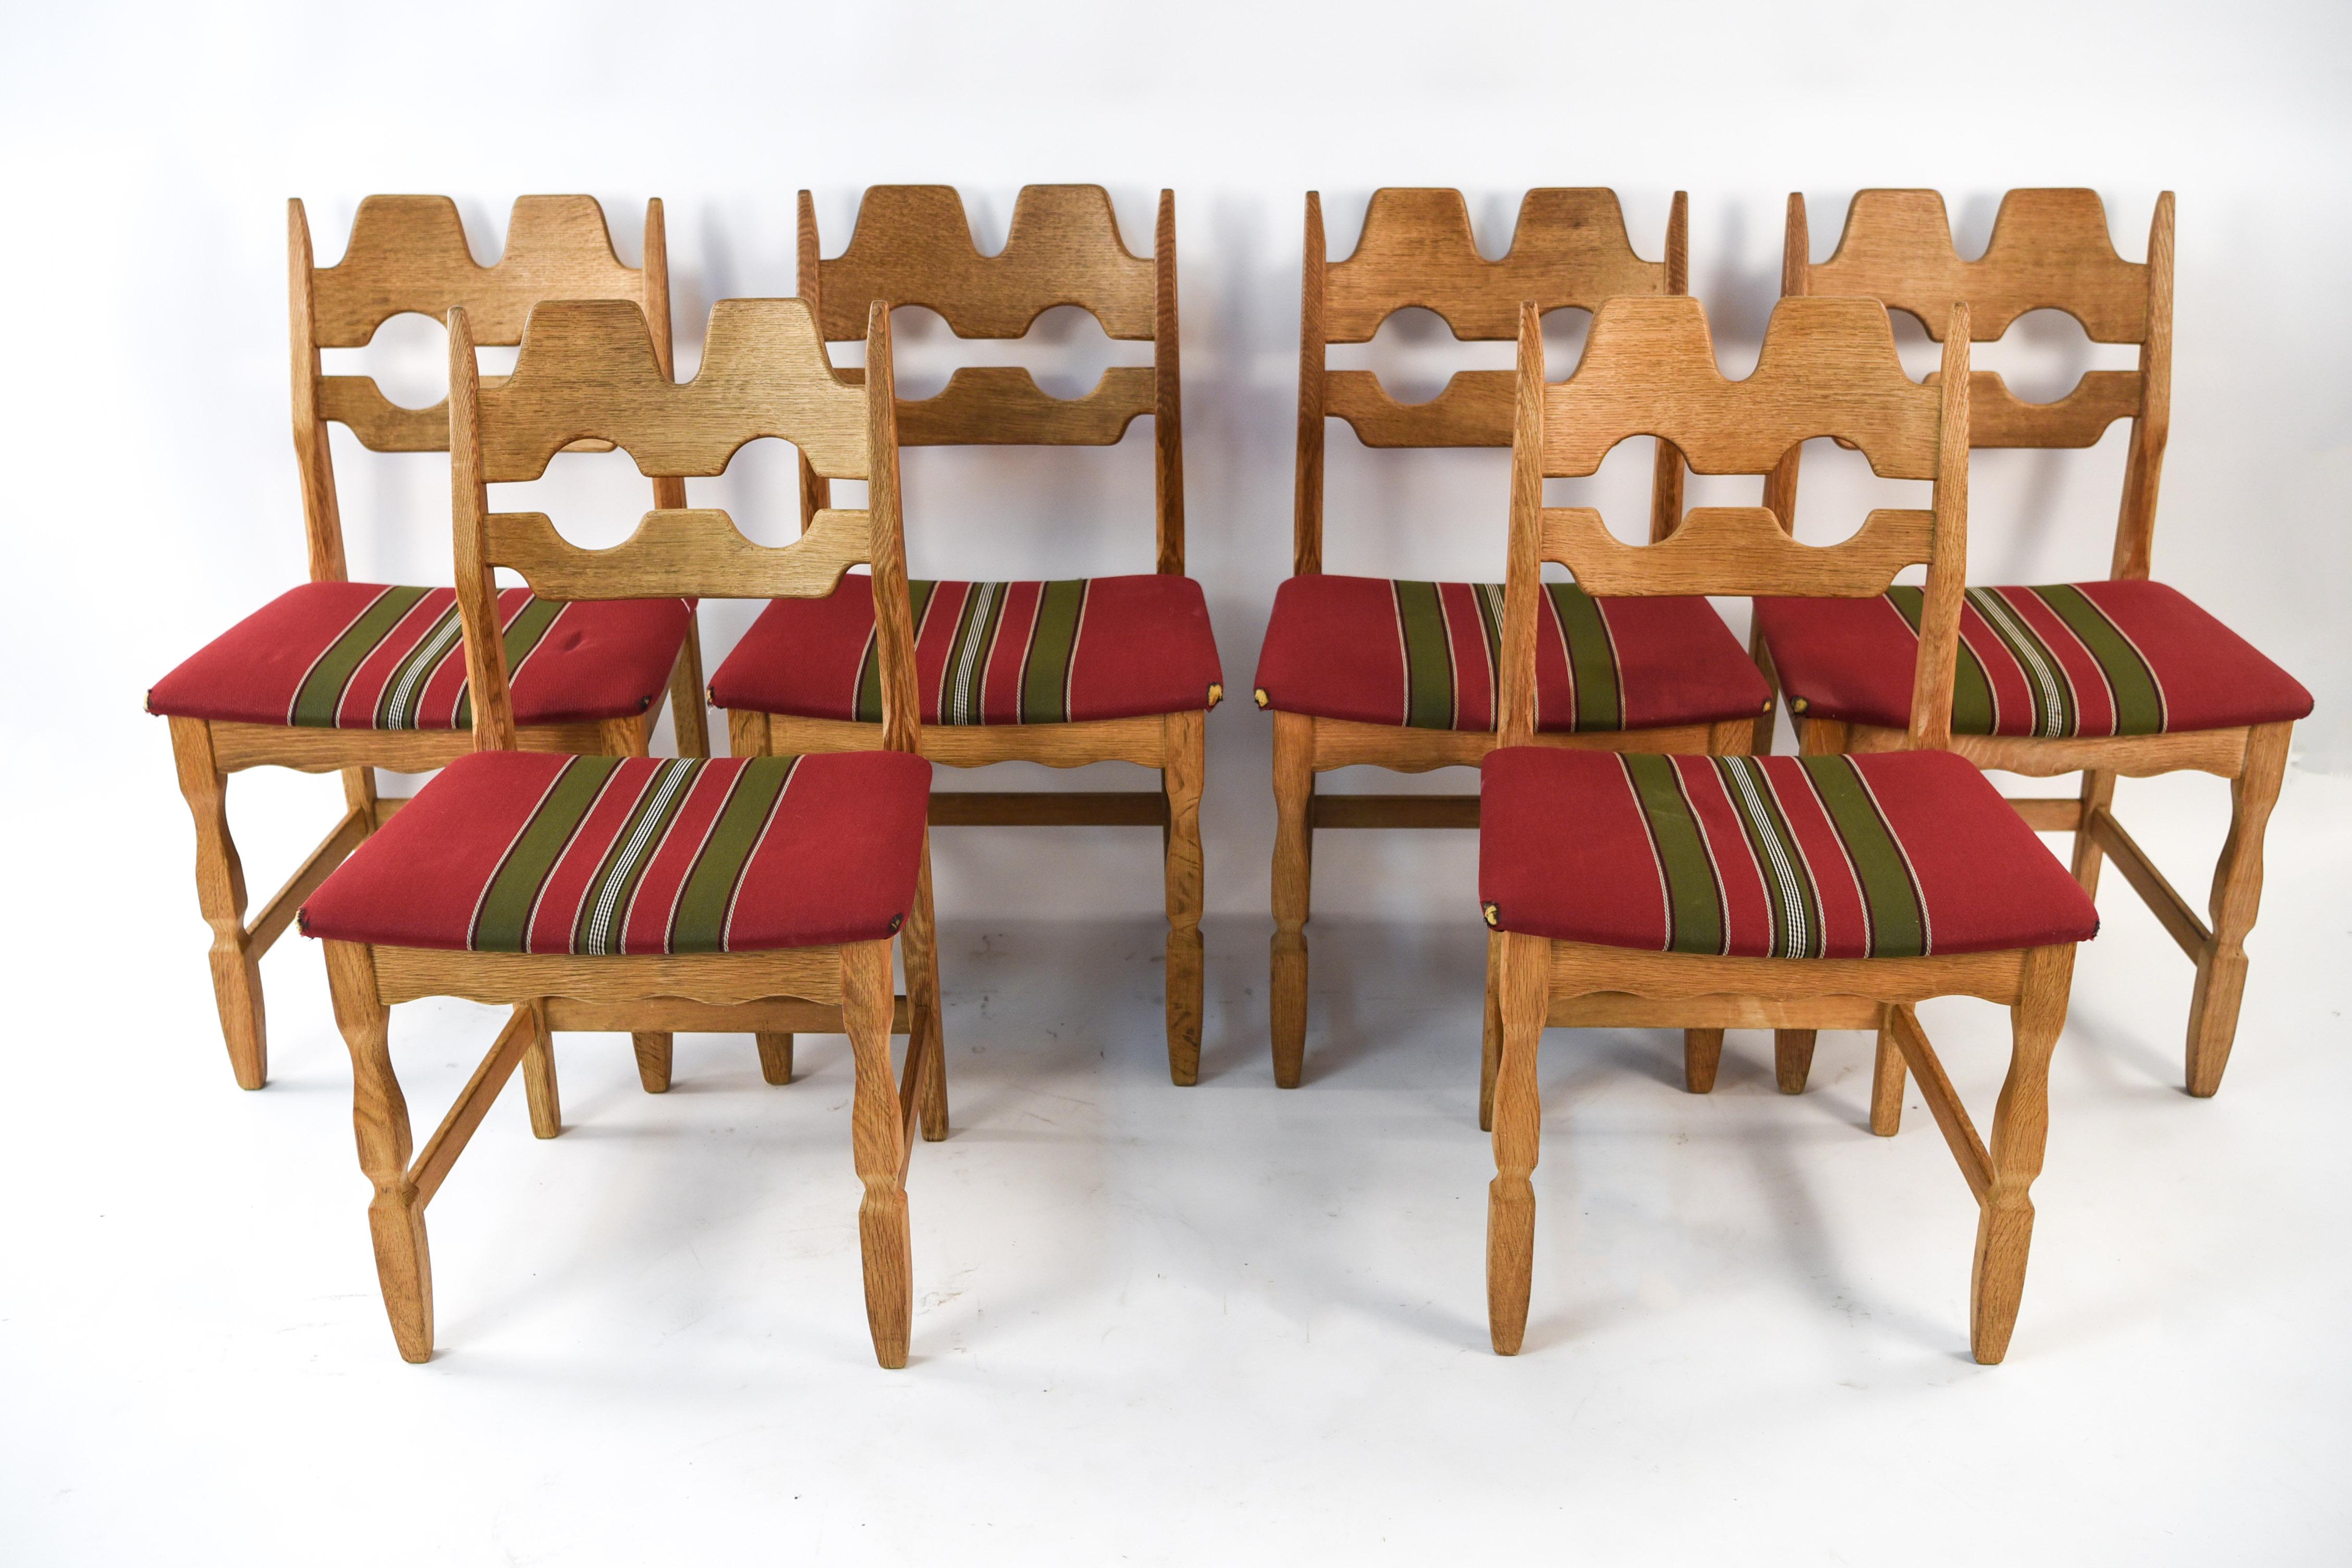 This is a wonderful, large set of eight dining chairs designed by Henning Kjaernulf in the 1960s. These sturdy chairs are made of solid oakwood and feature design elements of Baroque and midcentury style. Manufactured by Soro Stolefabrik.